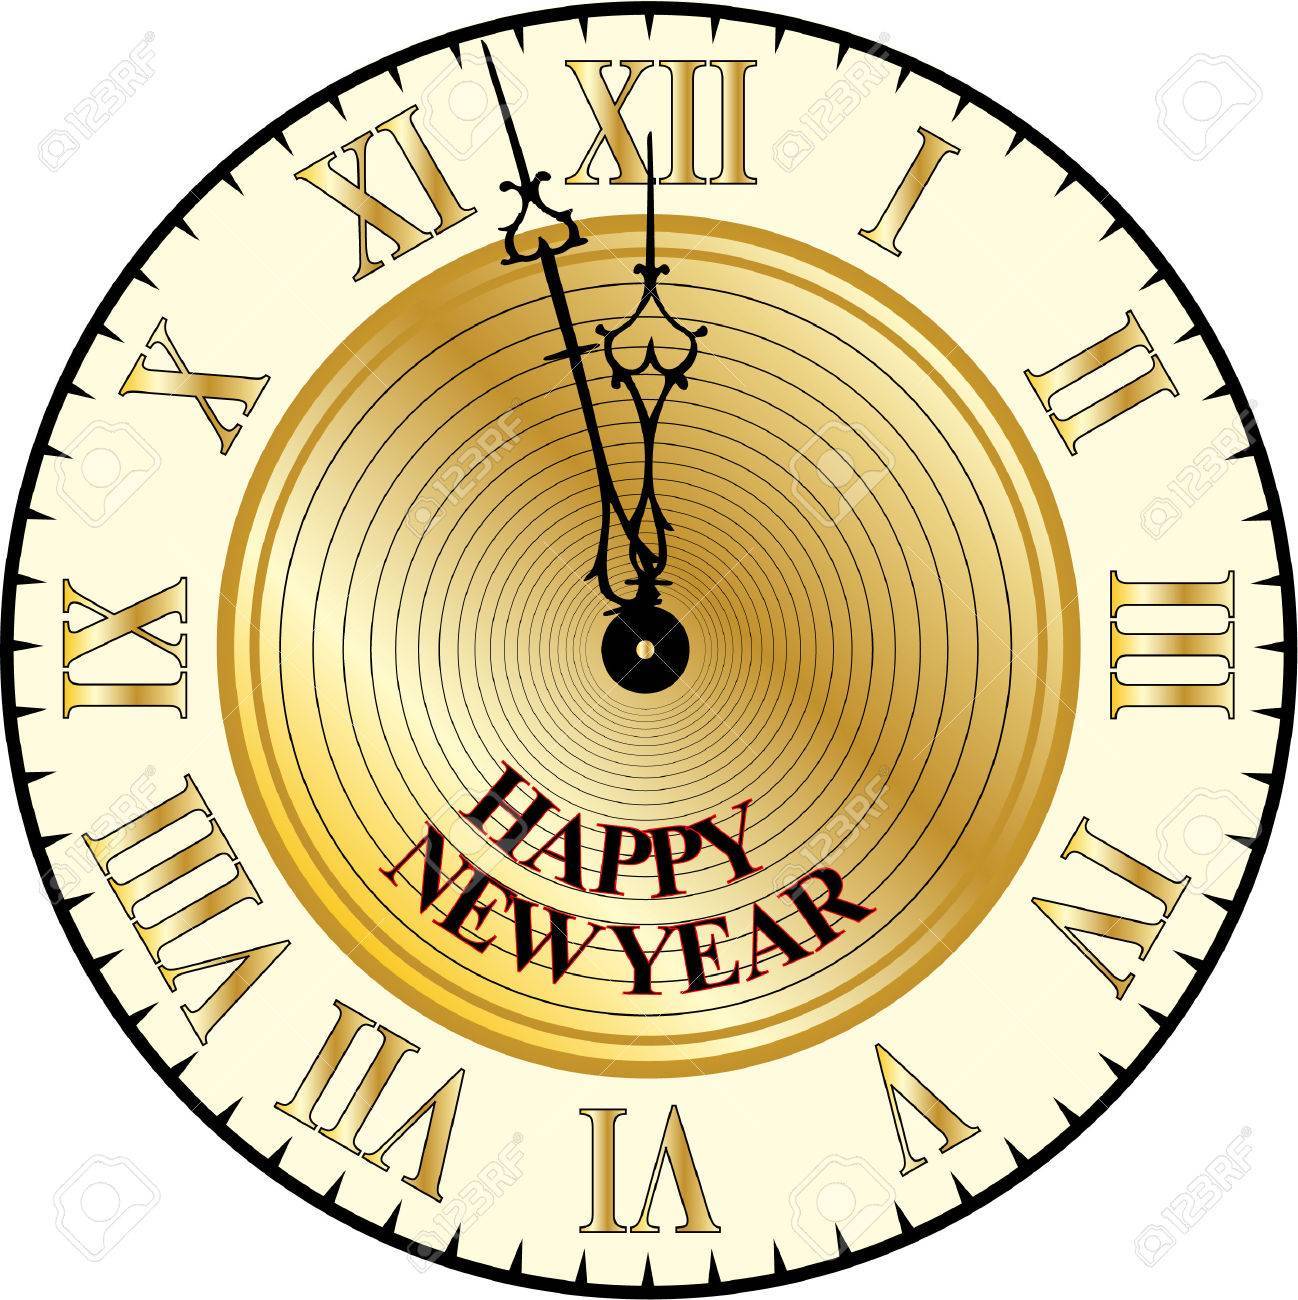 New years eve clock clipart 4 » Clipart Portal.